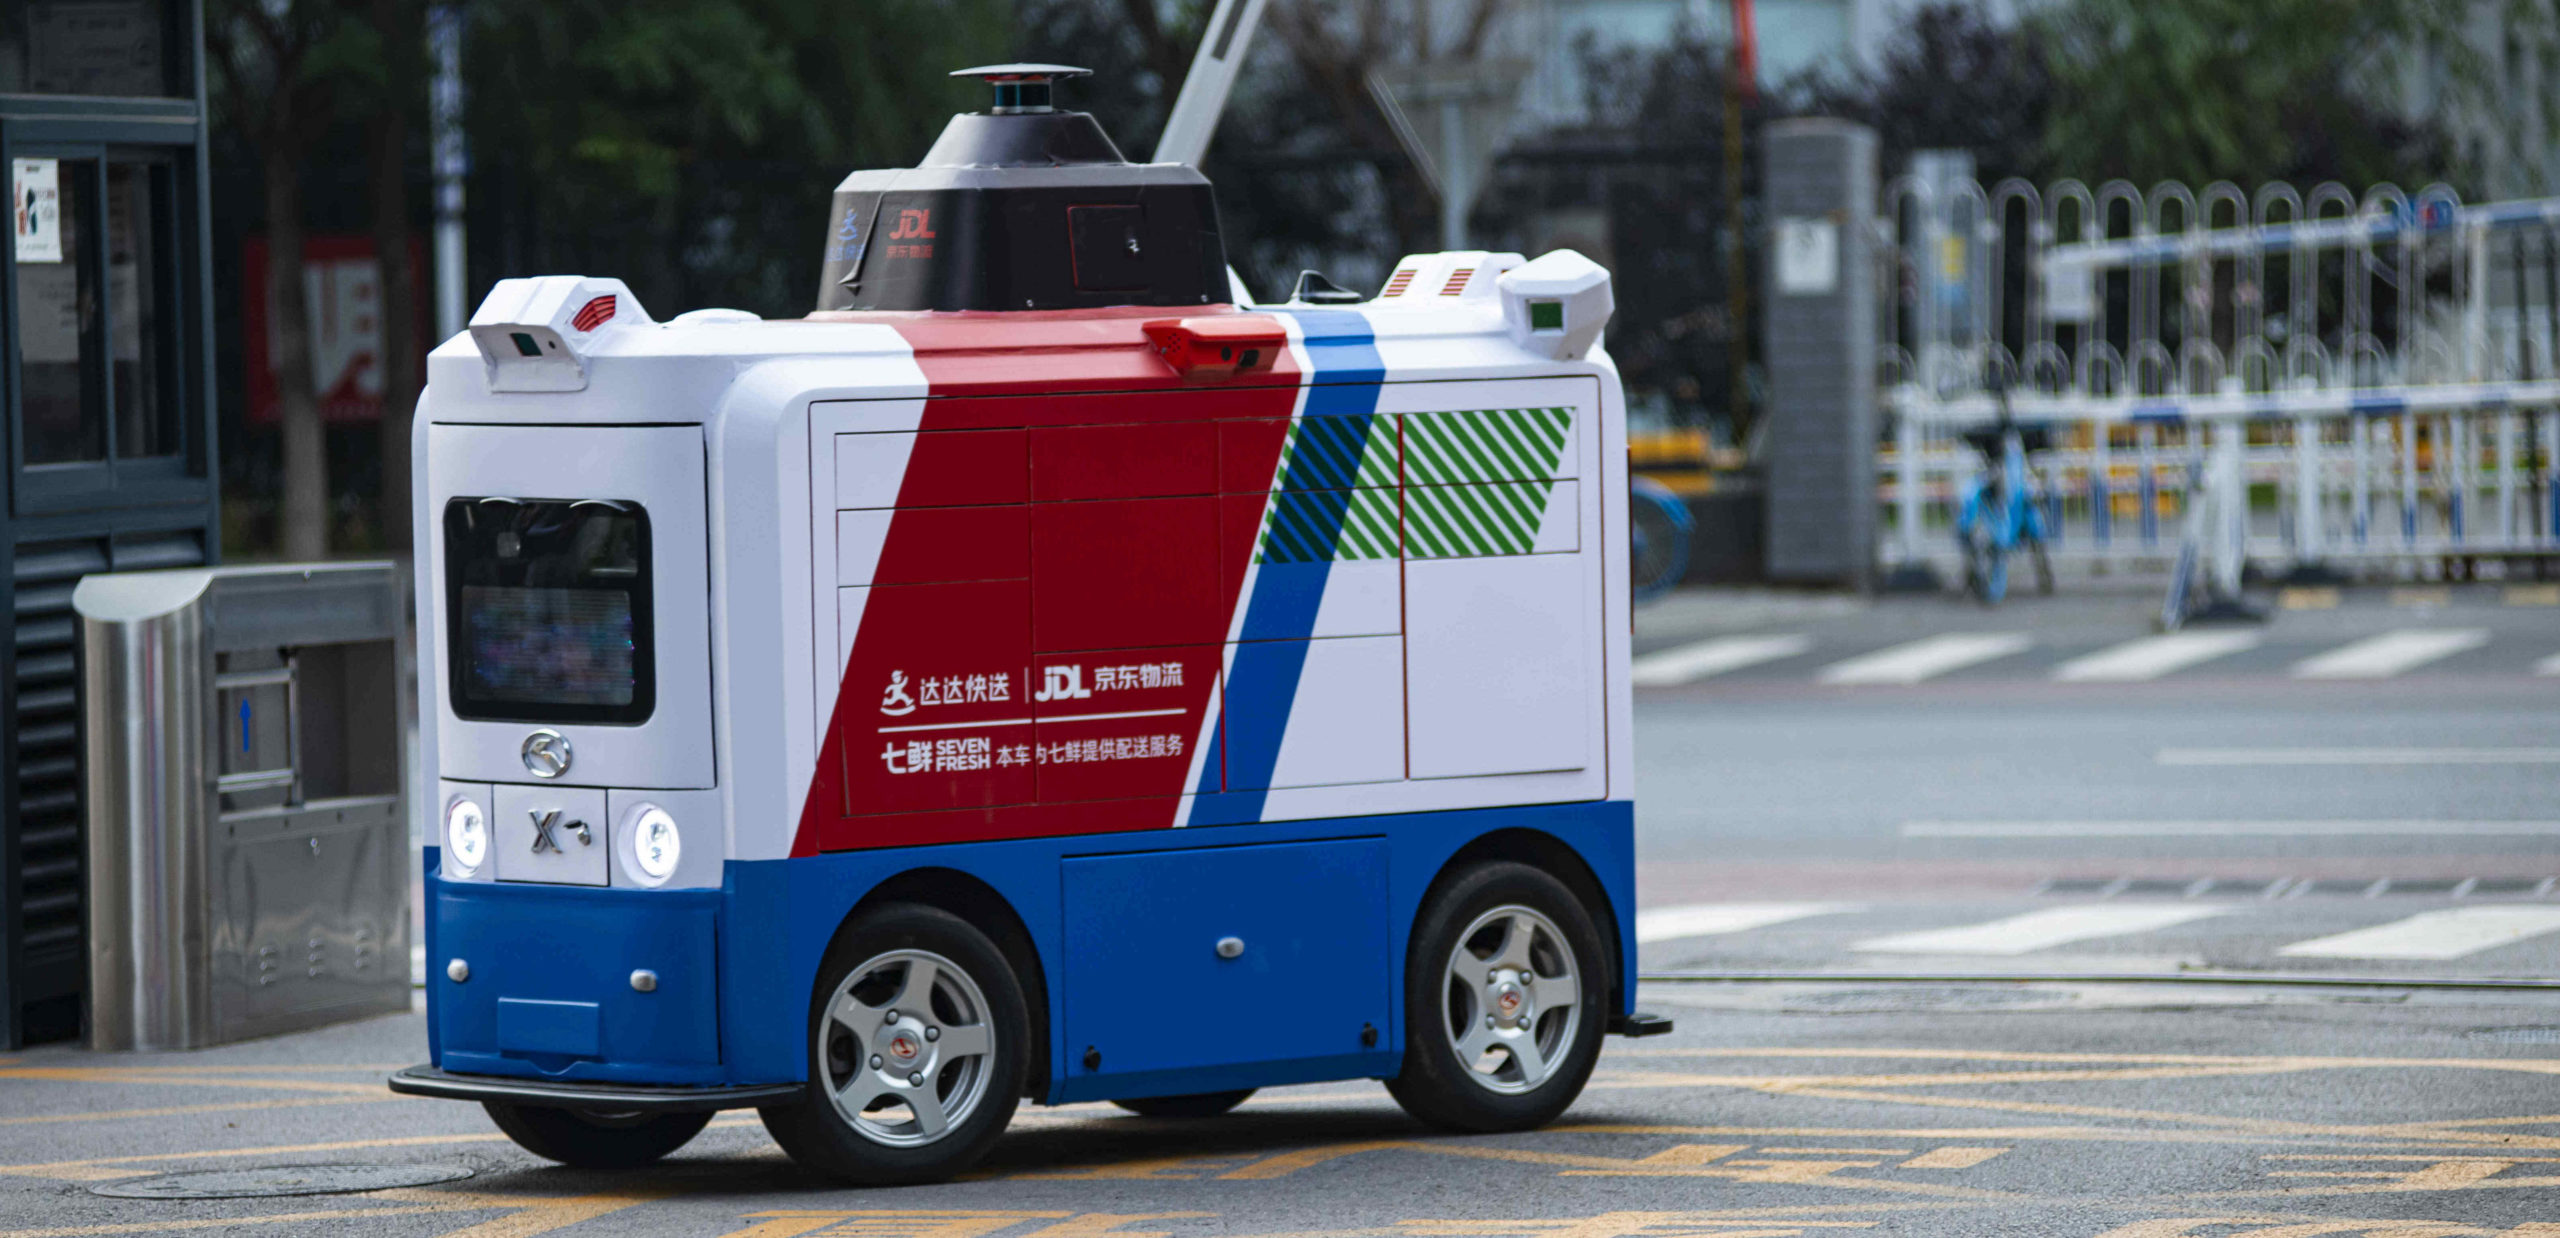 Yonghui’s unmanned vehicles to cover a dozen neighbourhoods, fulfilling nearly 5,000 orders with driving mileage over 10,000 kilometres.